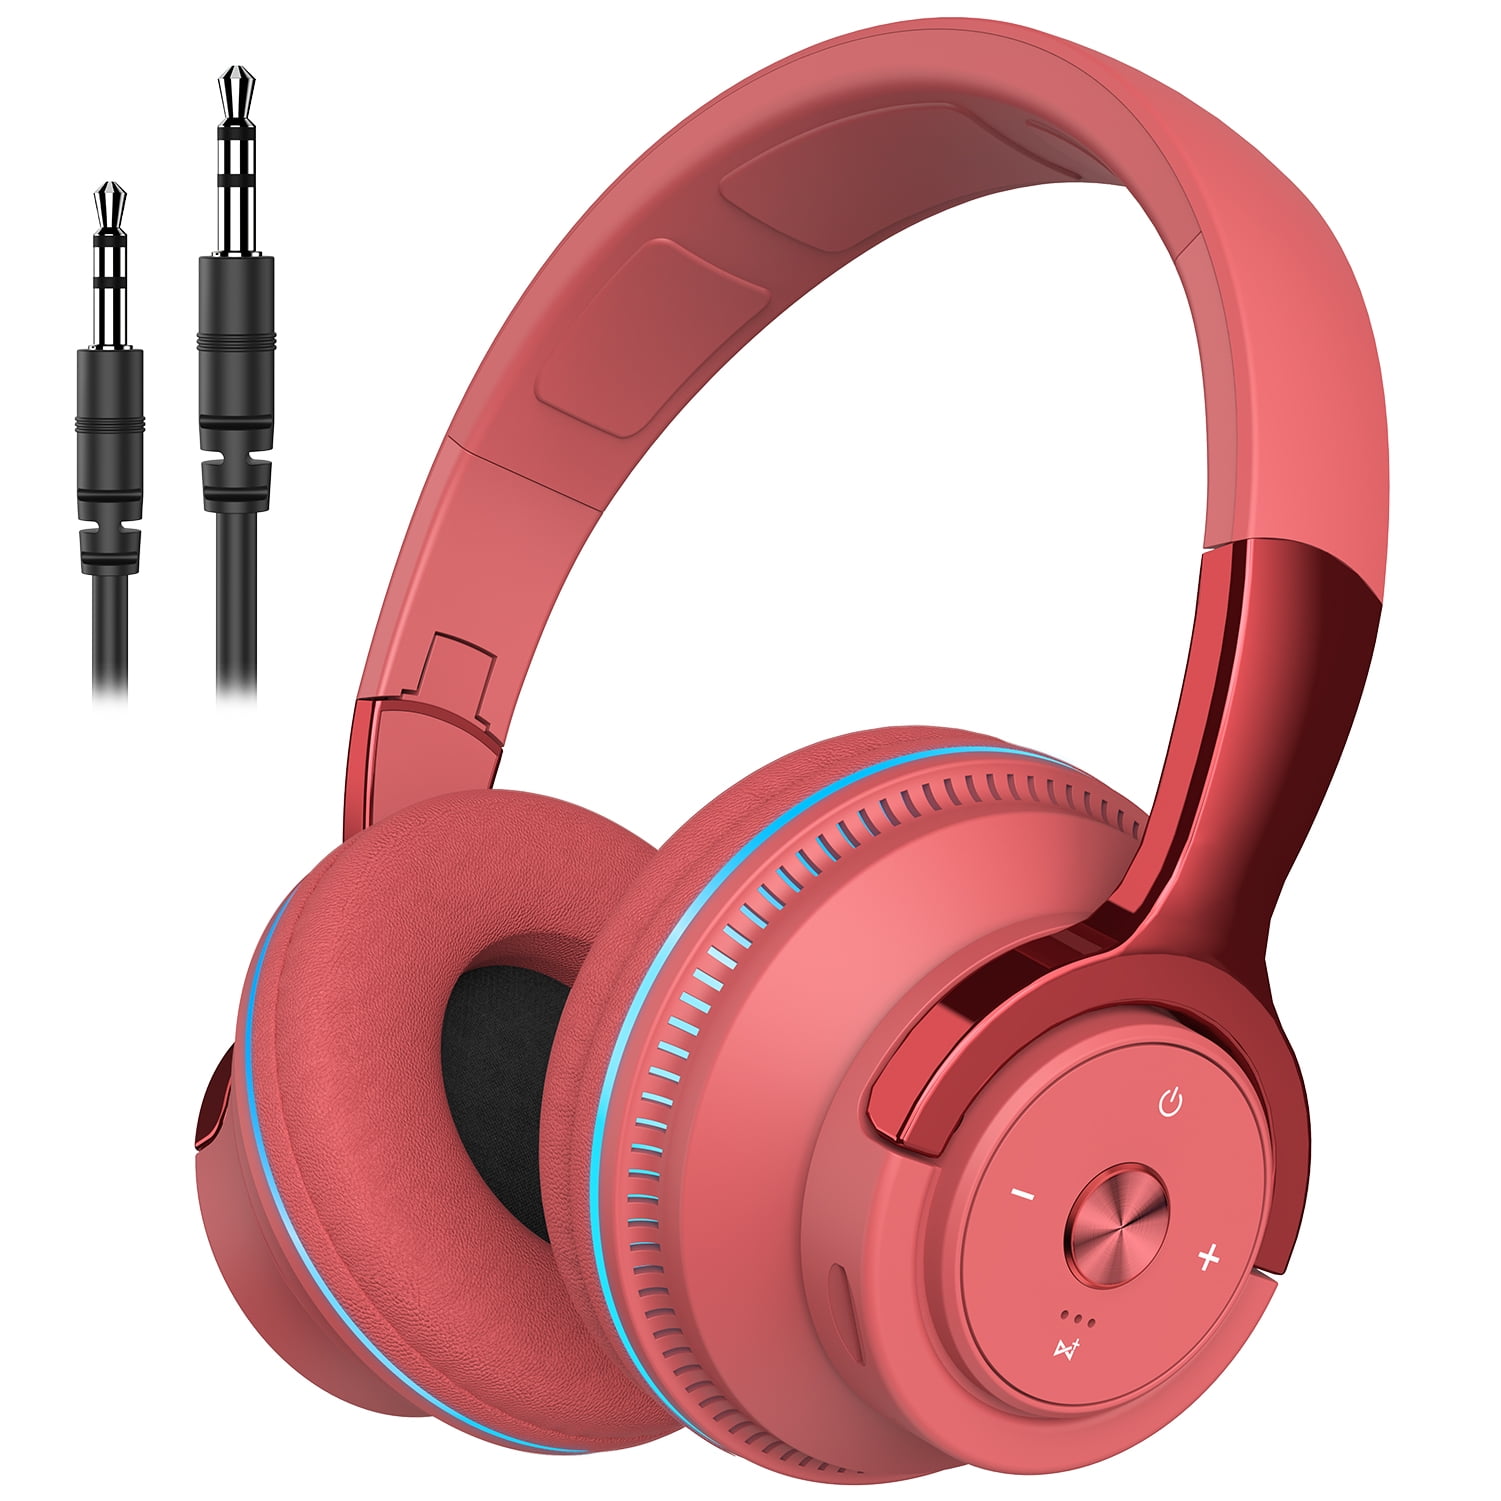 Wireless Headphone, Upgrade Bass HiFi Stereo Wireless Heaset, Foldable & Wireless Wired Mode, Noise Isolating Over Ear Headphone Microphone and Volume Control, for Laptop Cell Phone - Walmart.com